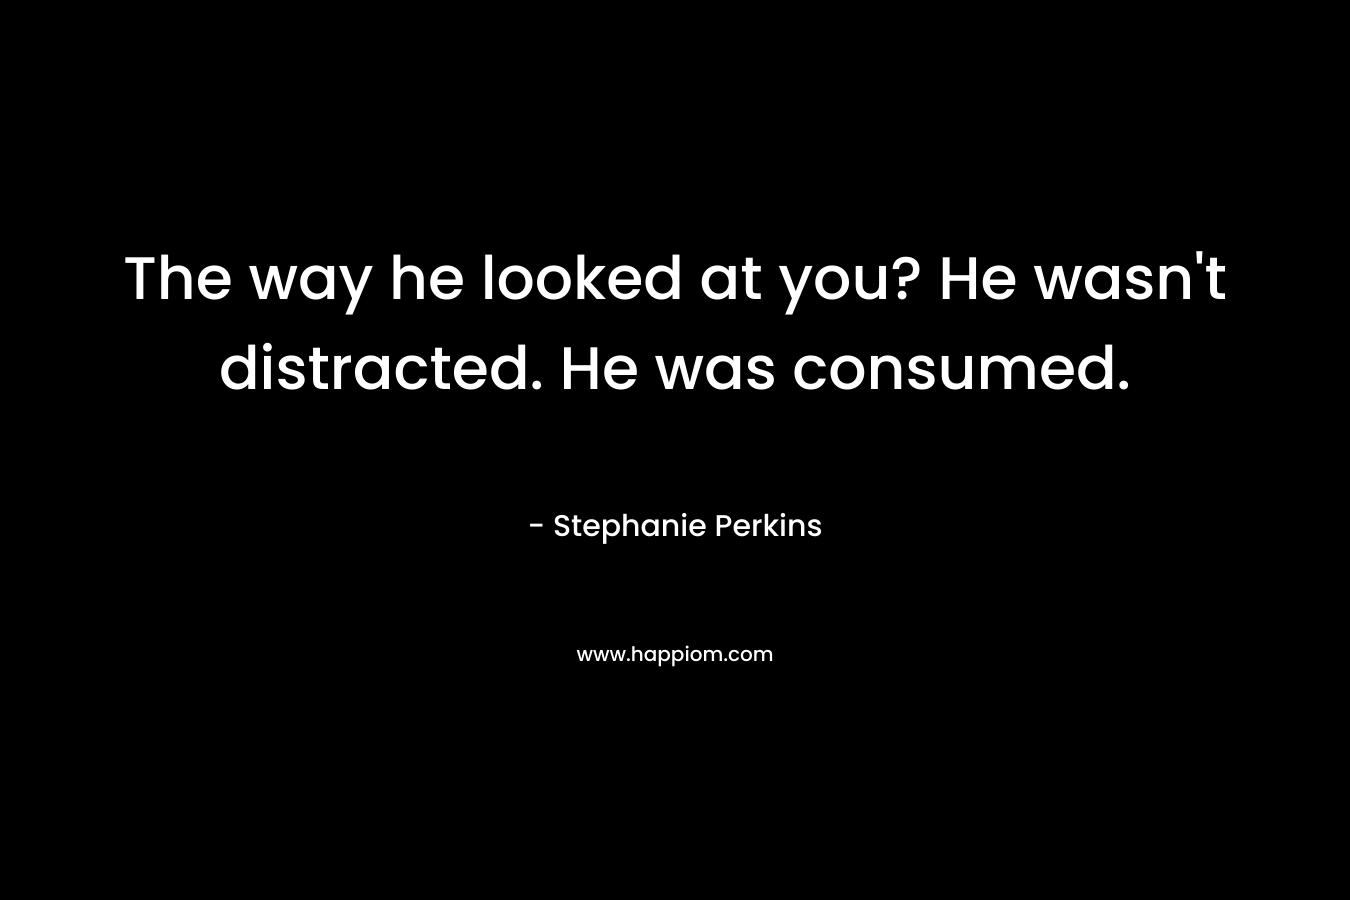 The way he looked at you? He wasn't distracted. He was consumed.